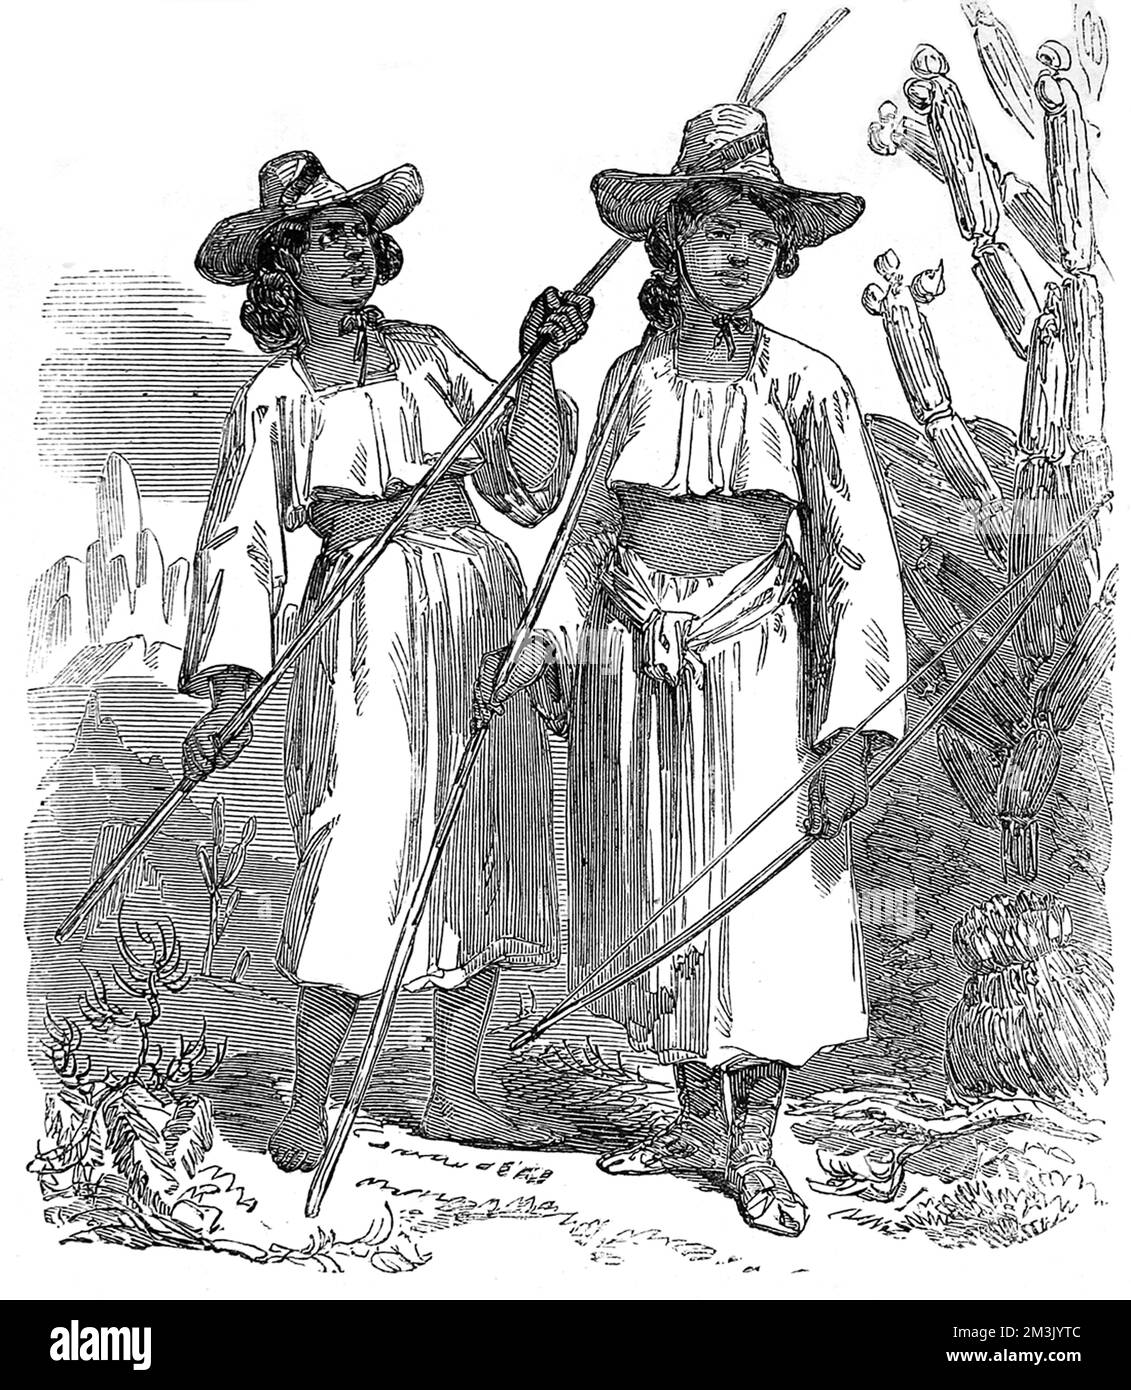 Some native American Indian women, of the Papagos tribe, with bows and arrows, wearing wide brimmed hats, cropped tops and skirts. Stock Photo